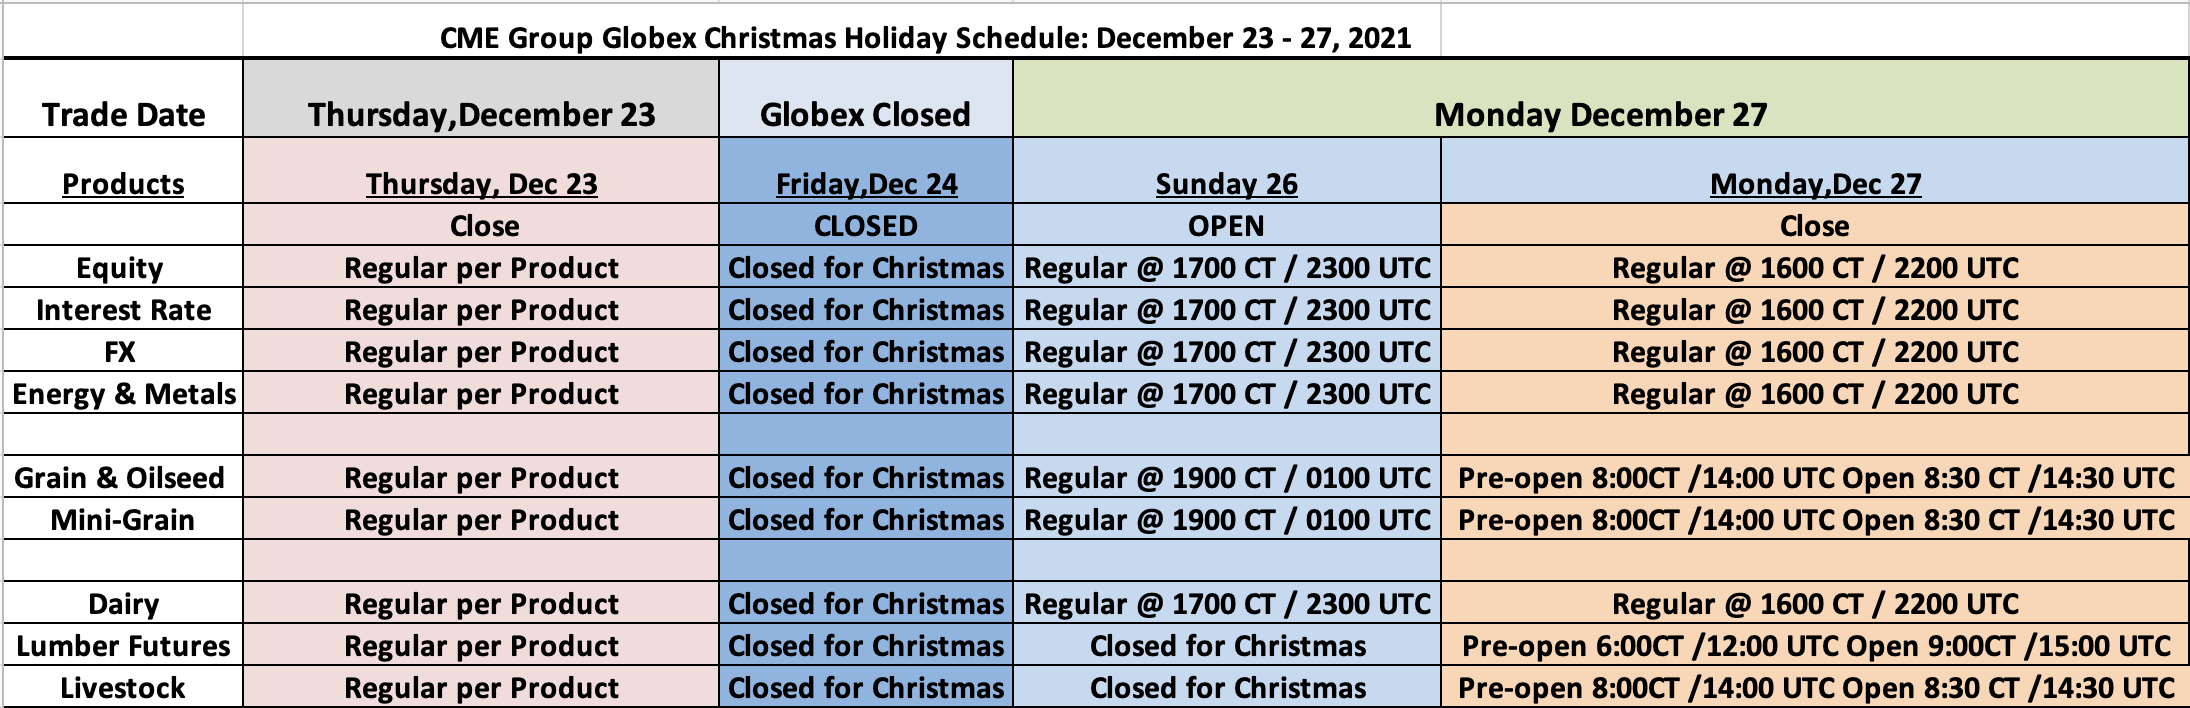 Christmas Holiday Trading Schedule - 2021